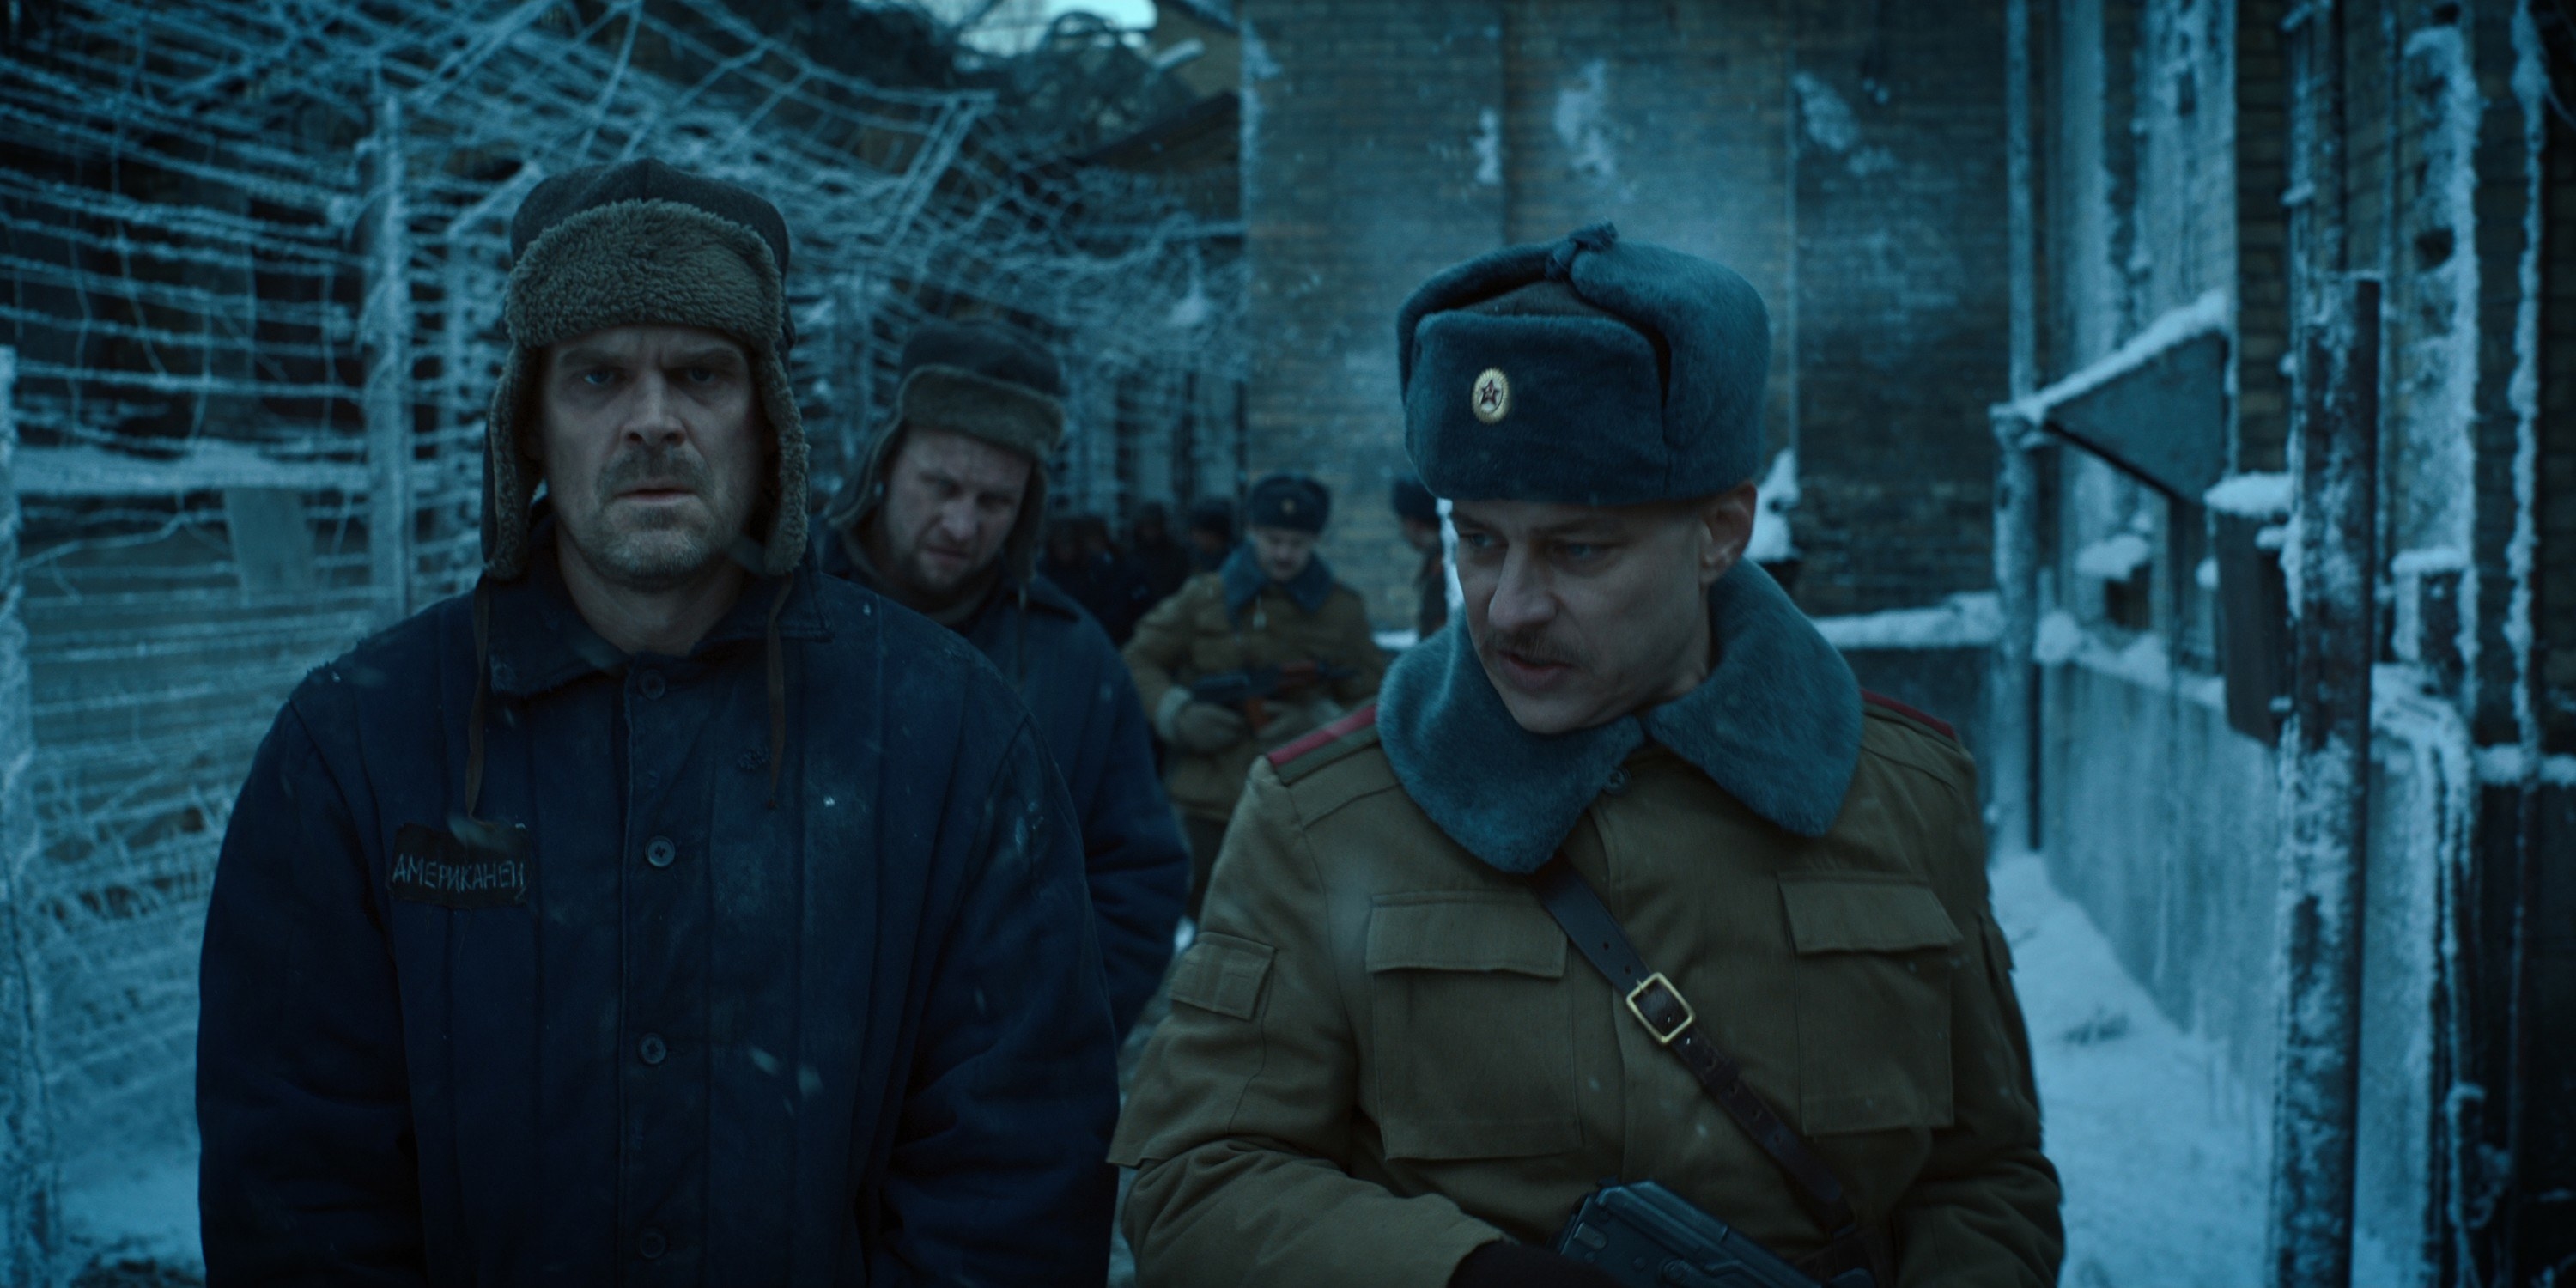 Jim in a Russian-style hat (with ear flaps) in an icy, prisonlike setting